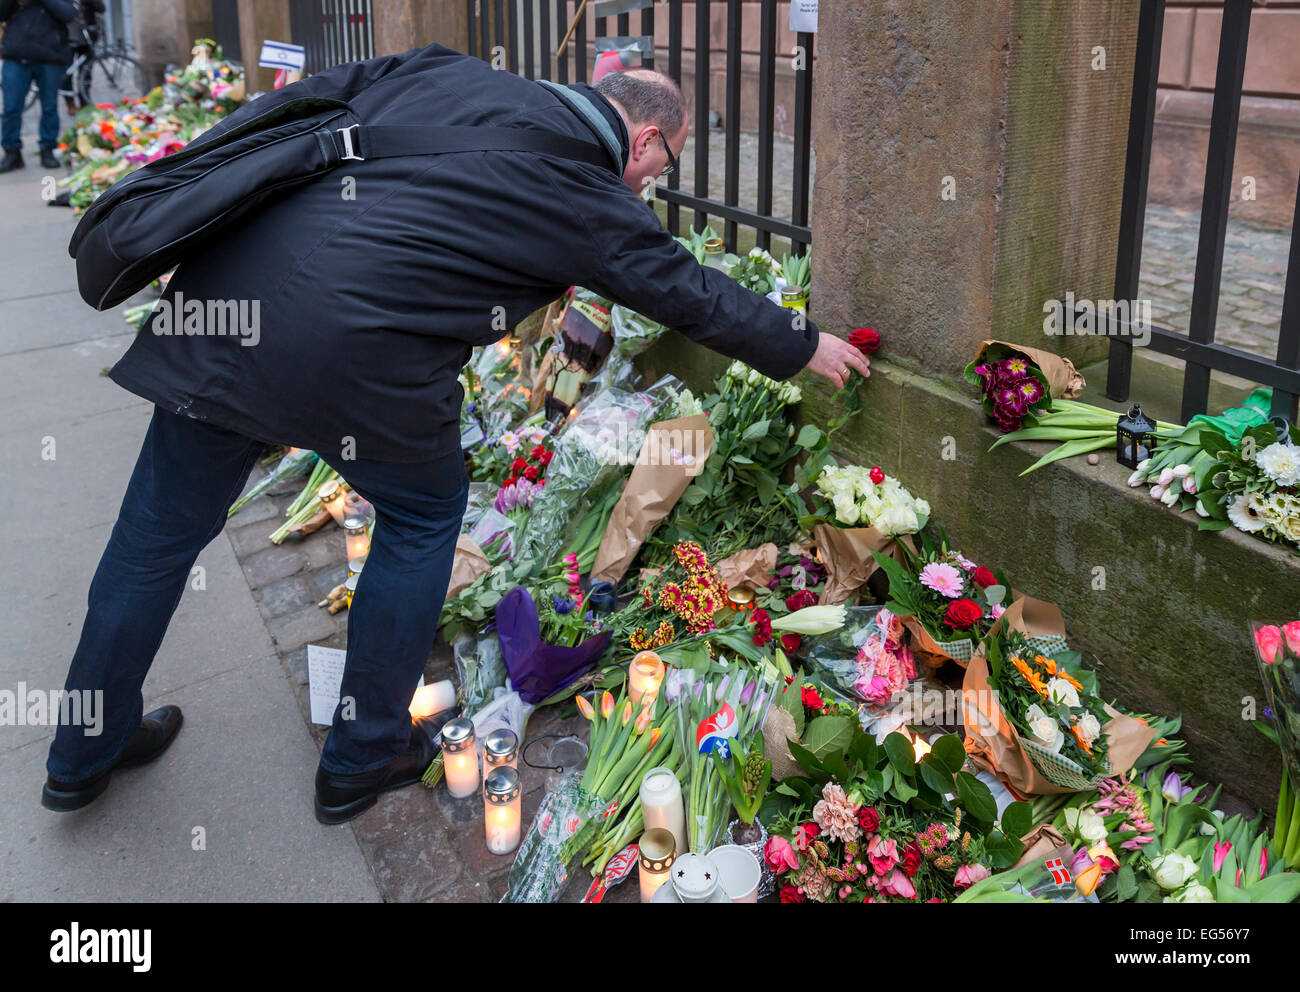 A man laying flowers to commemorate for a man killed at Copenhagen's main synagogue during the terrorist attack on 15 February 2015, Denmark Stock Photo